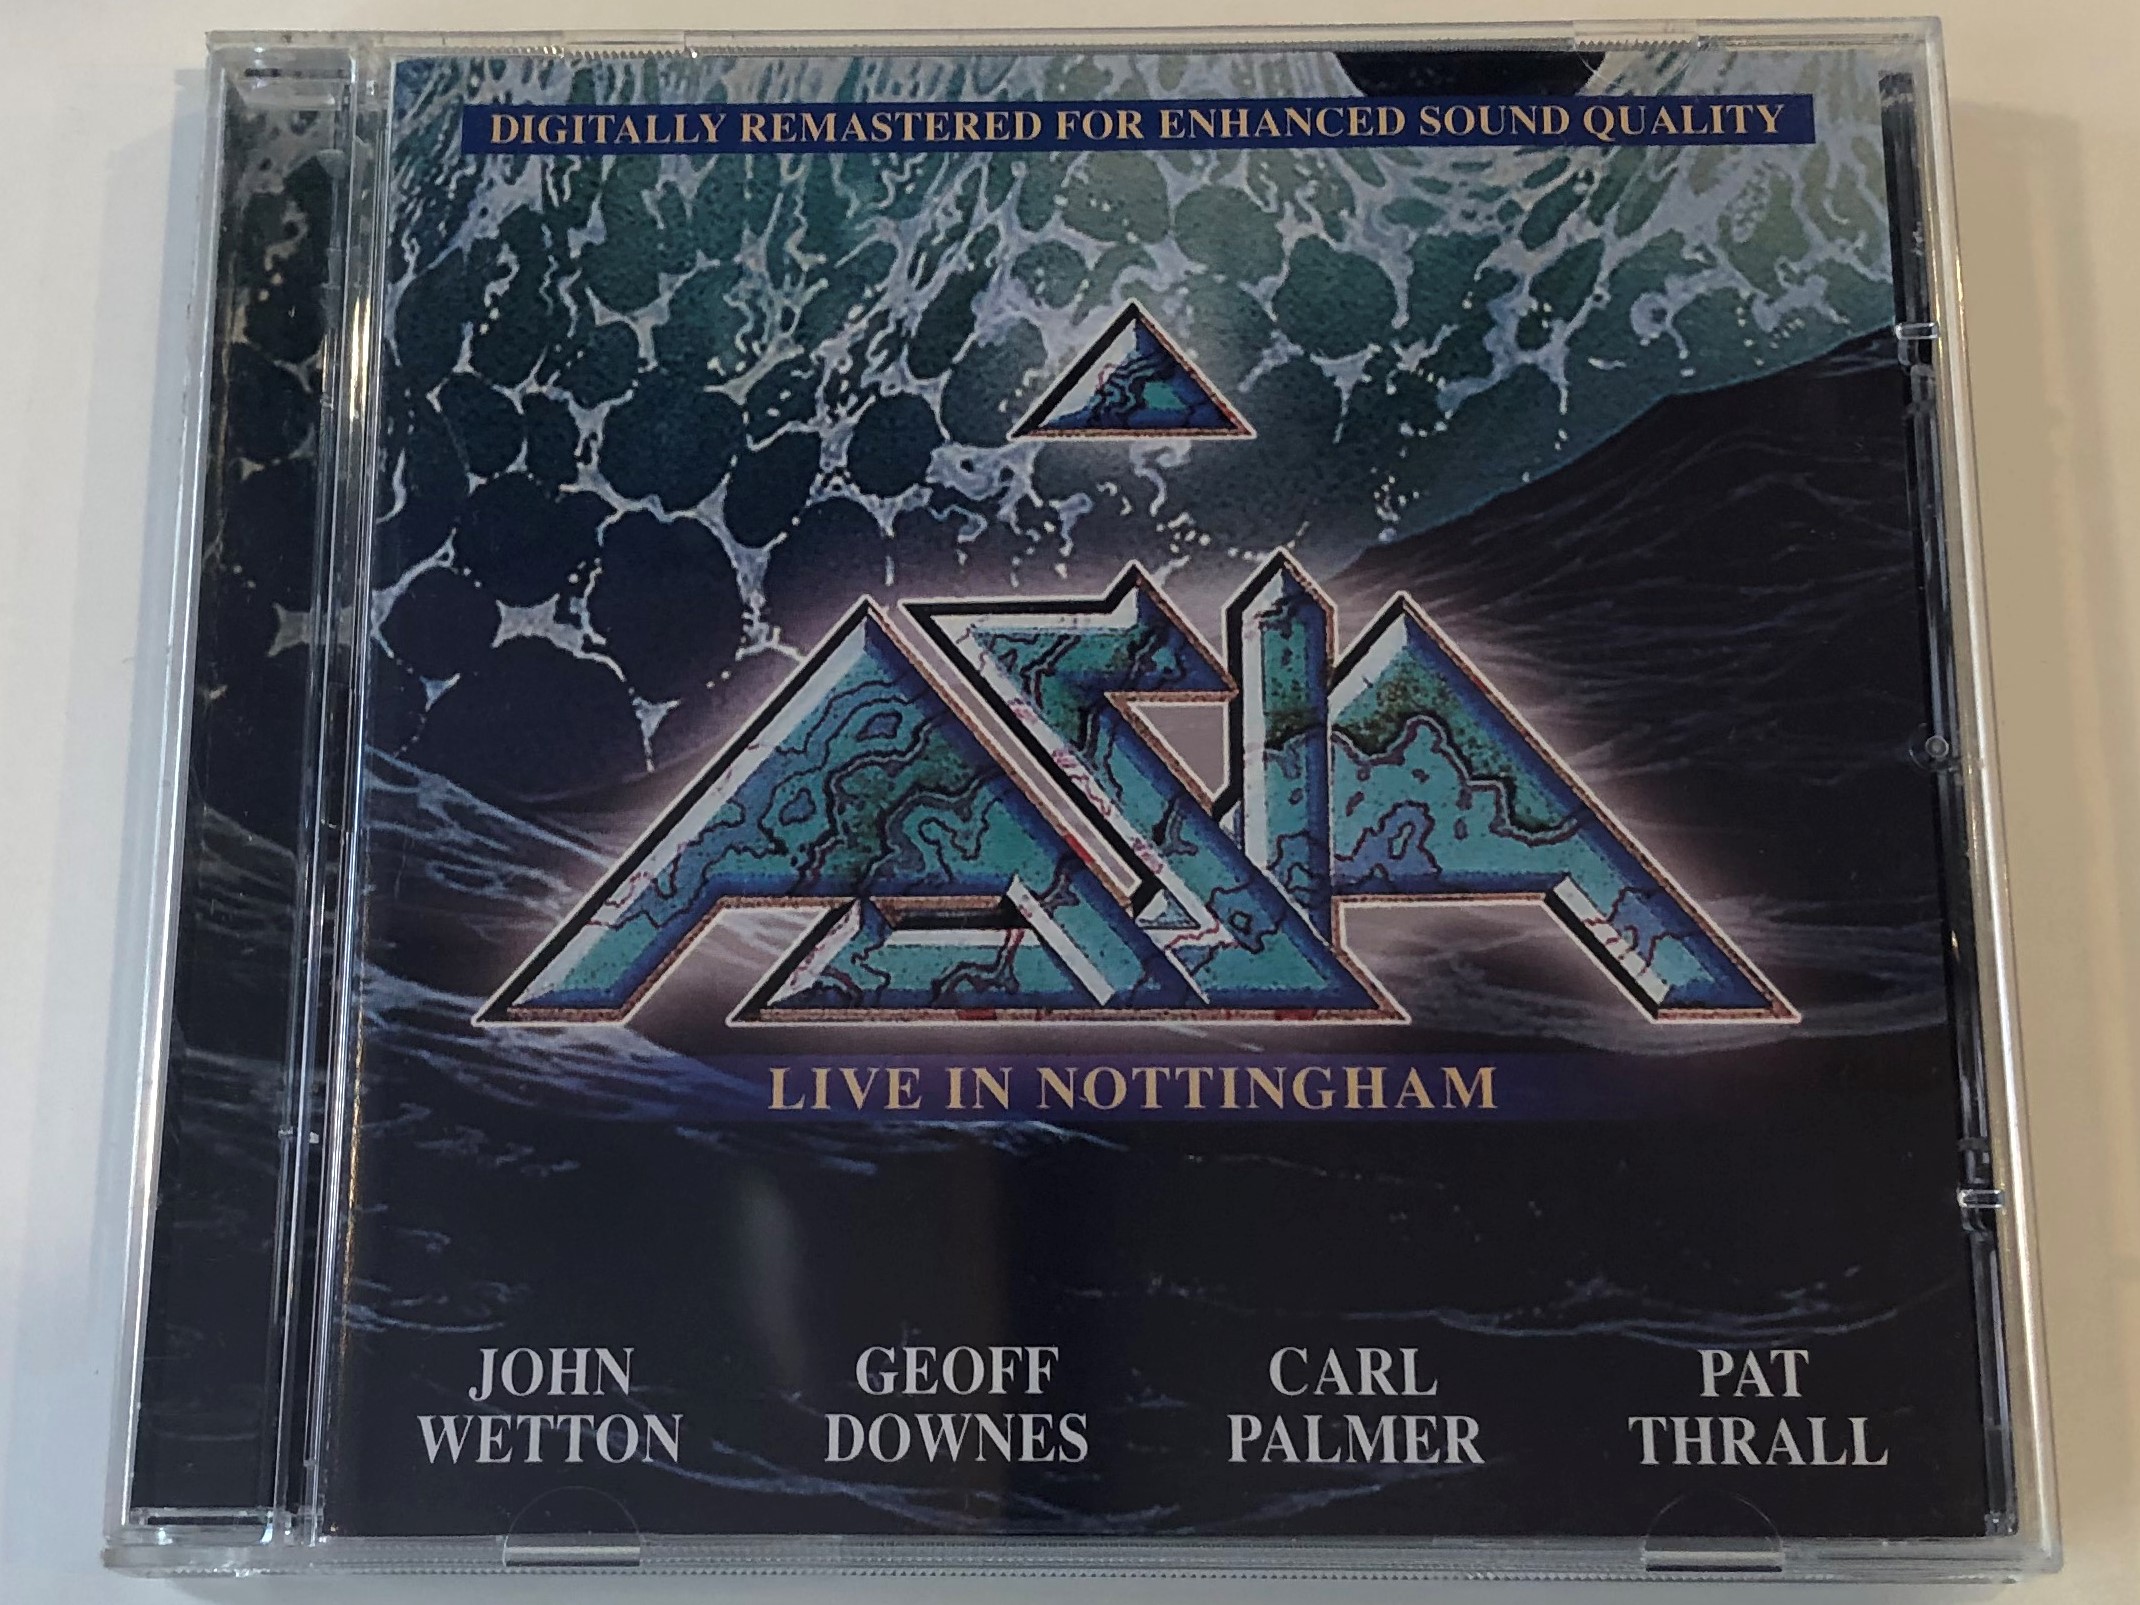 asia-live-in-nottingham-digitally-remastered-for-enhanced-sound-quality-john-wetton-geoff-downes-carl-palmer-pat-thrall-classic-rock-productions-audio-cd-2002-823880010460-1-.jpg